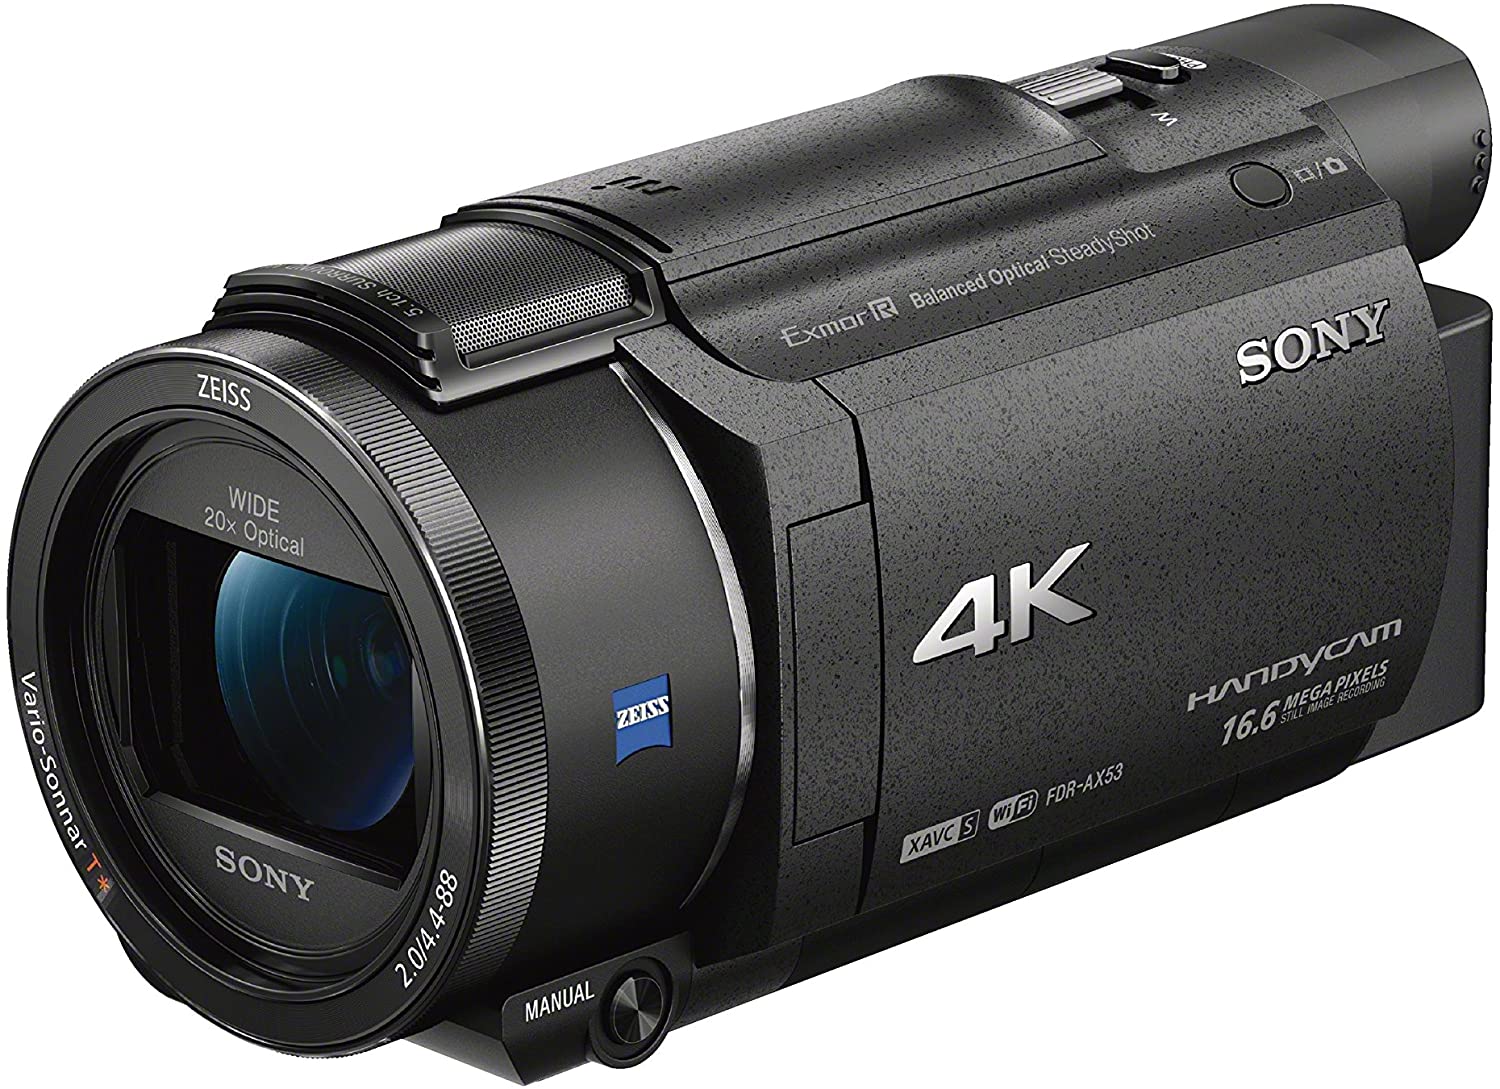 Sony Camcorder Render Cropped